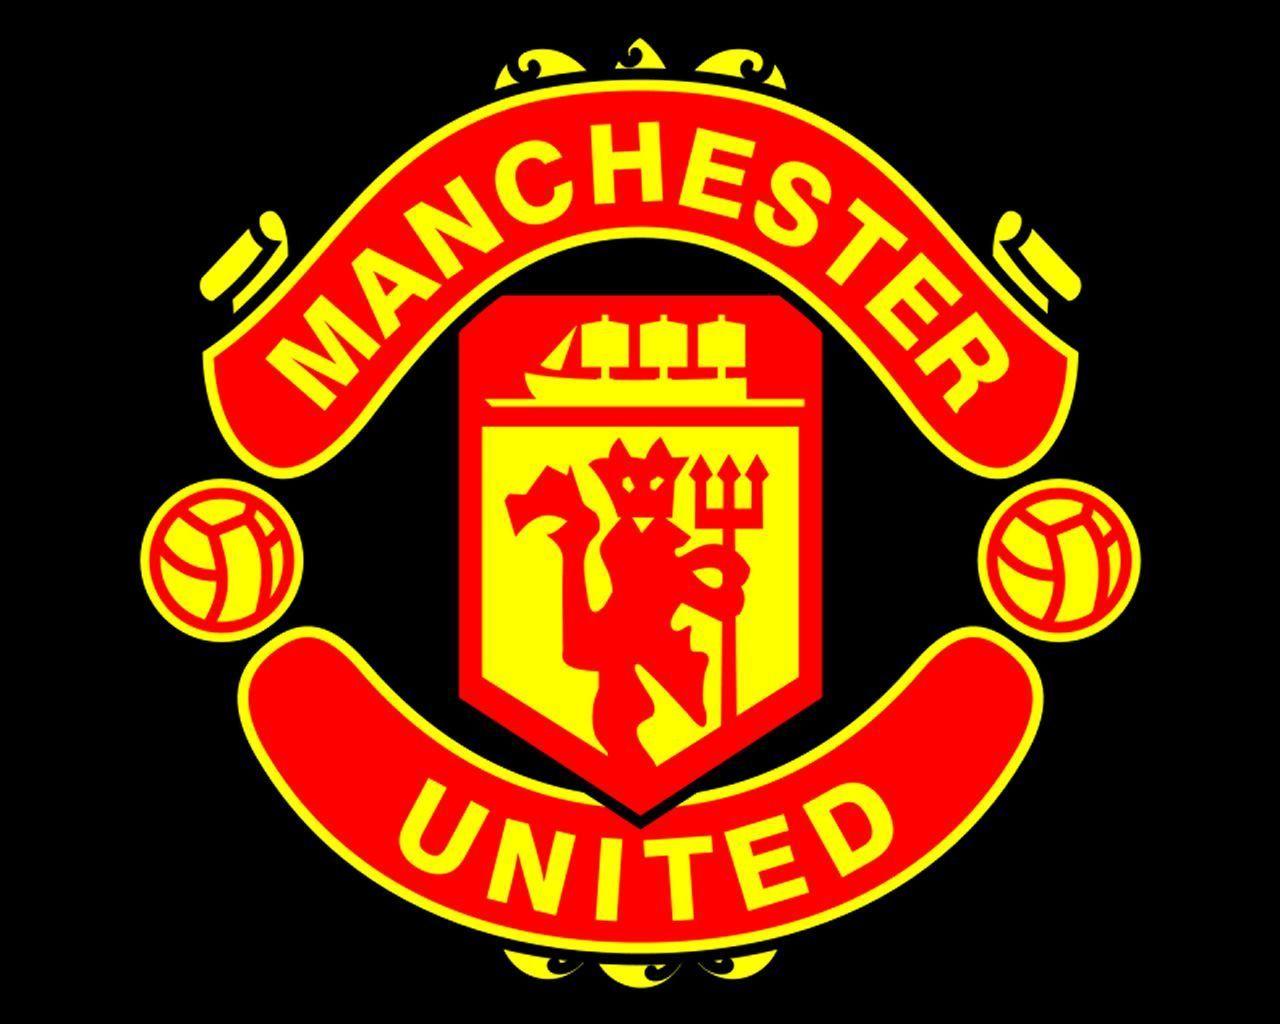 Mufc Logo - Manchester United Logo Wallpapers - Wallpaper Cave